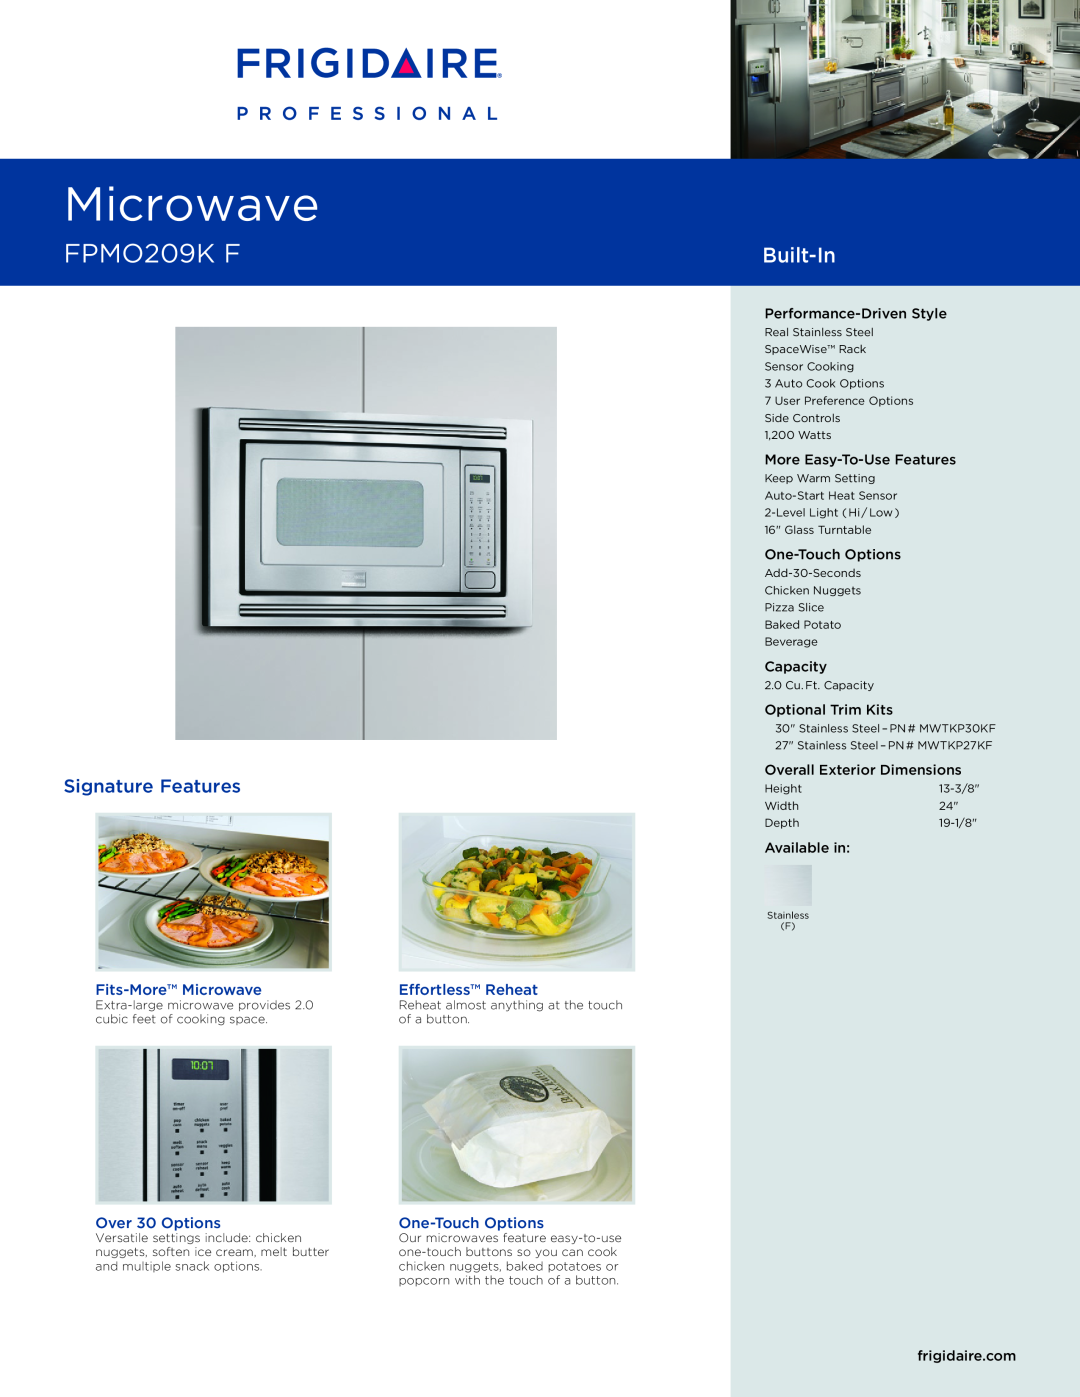 Frigidaire FPMO209KF dimensions Fits-MoreMicrowave, Over 30 Options, Effortless Reheat, One-TouchOptions, Capacity 